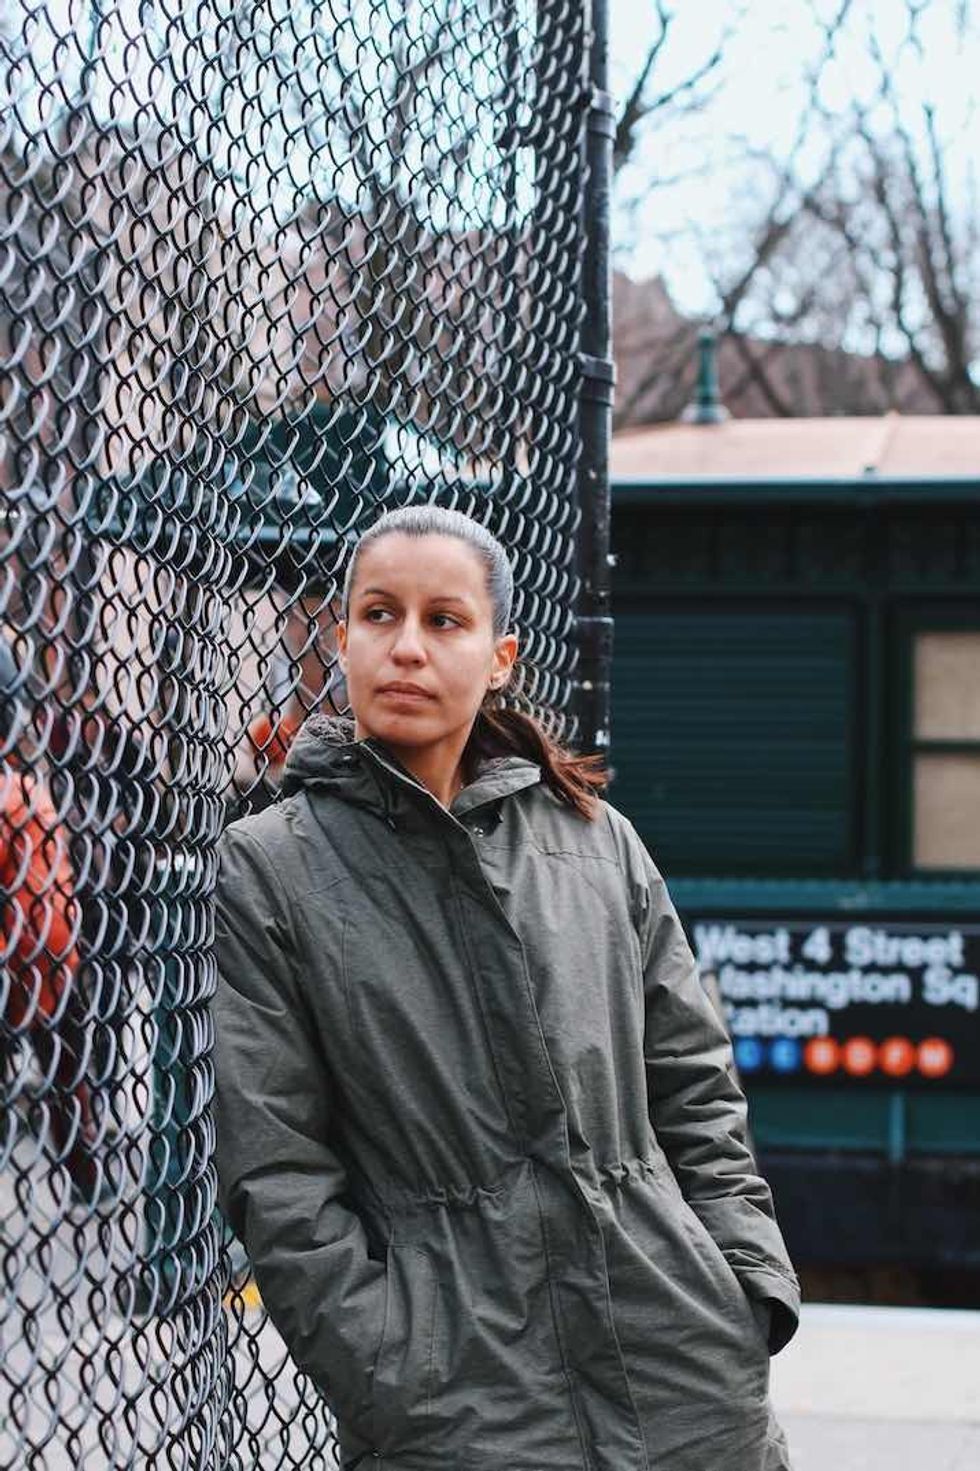 Woman in front of gate talks about stop-and-frisk